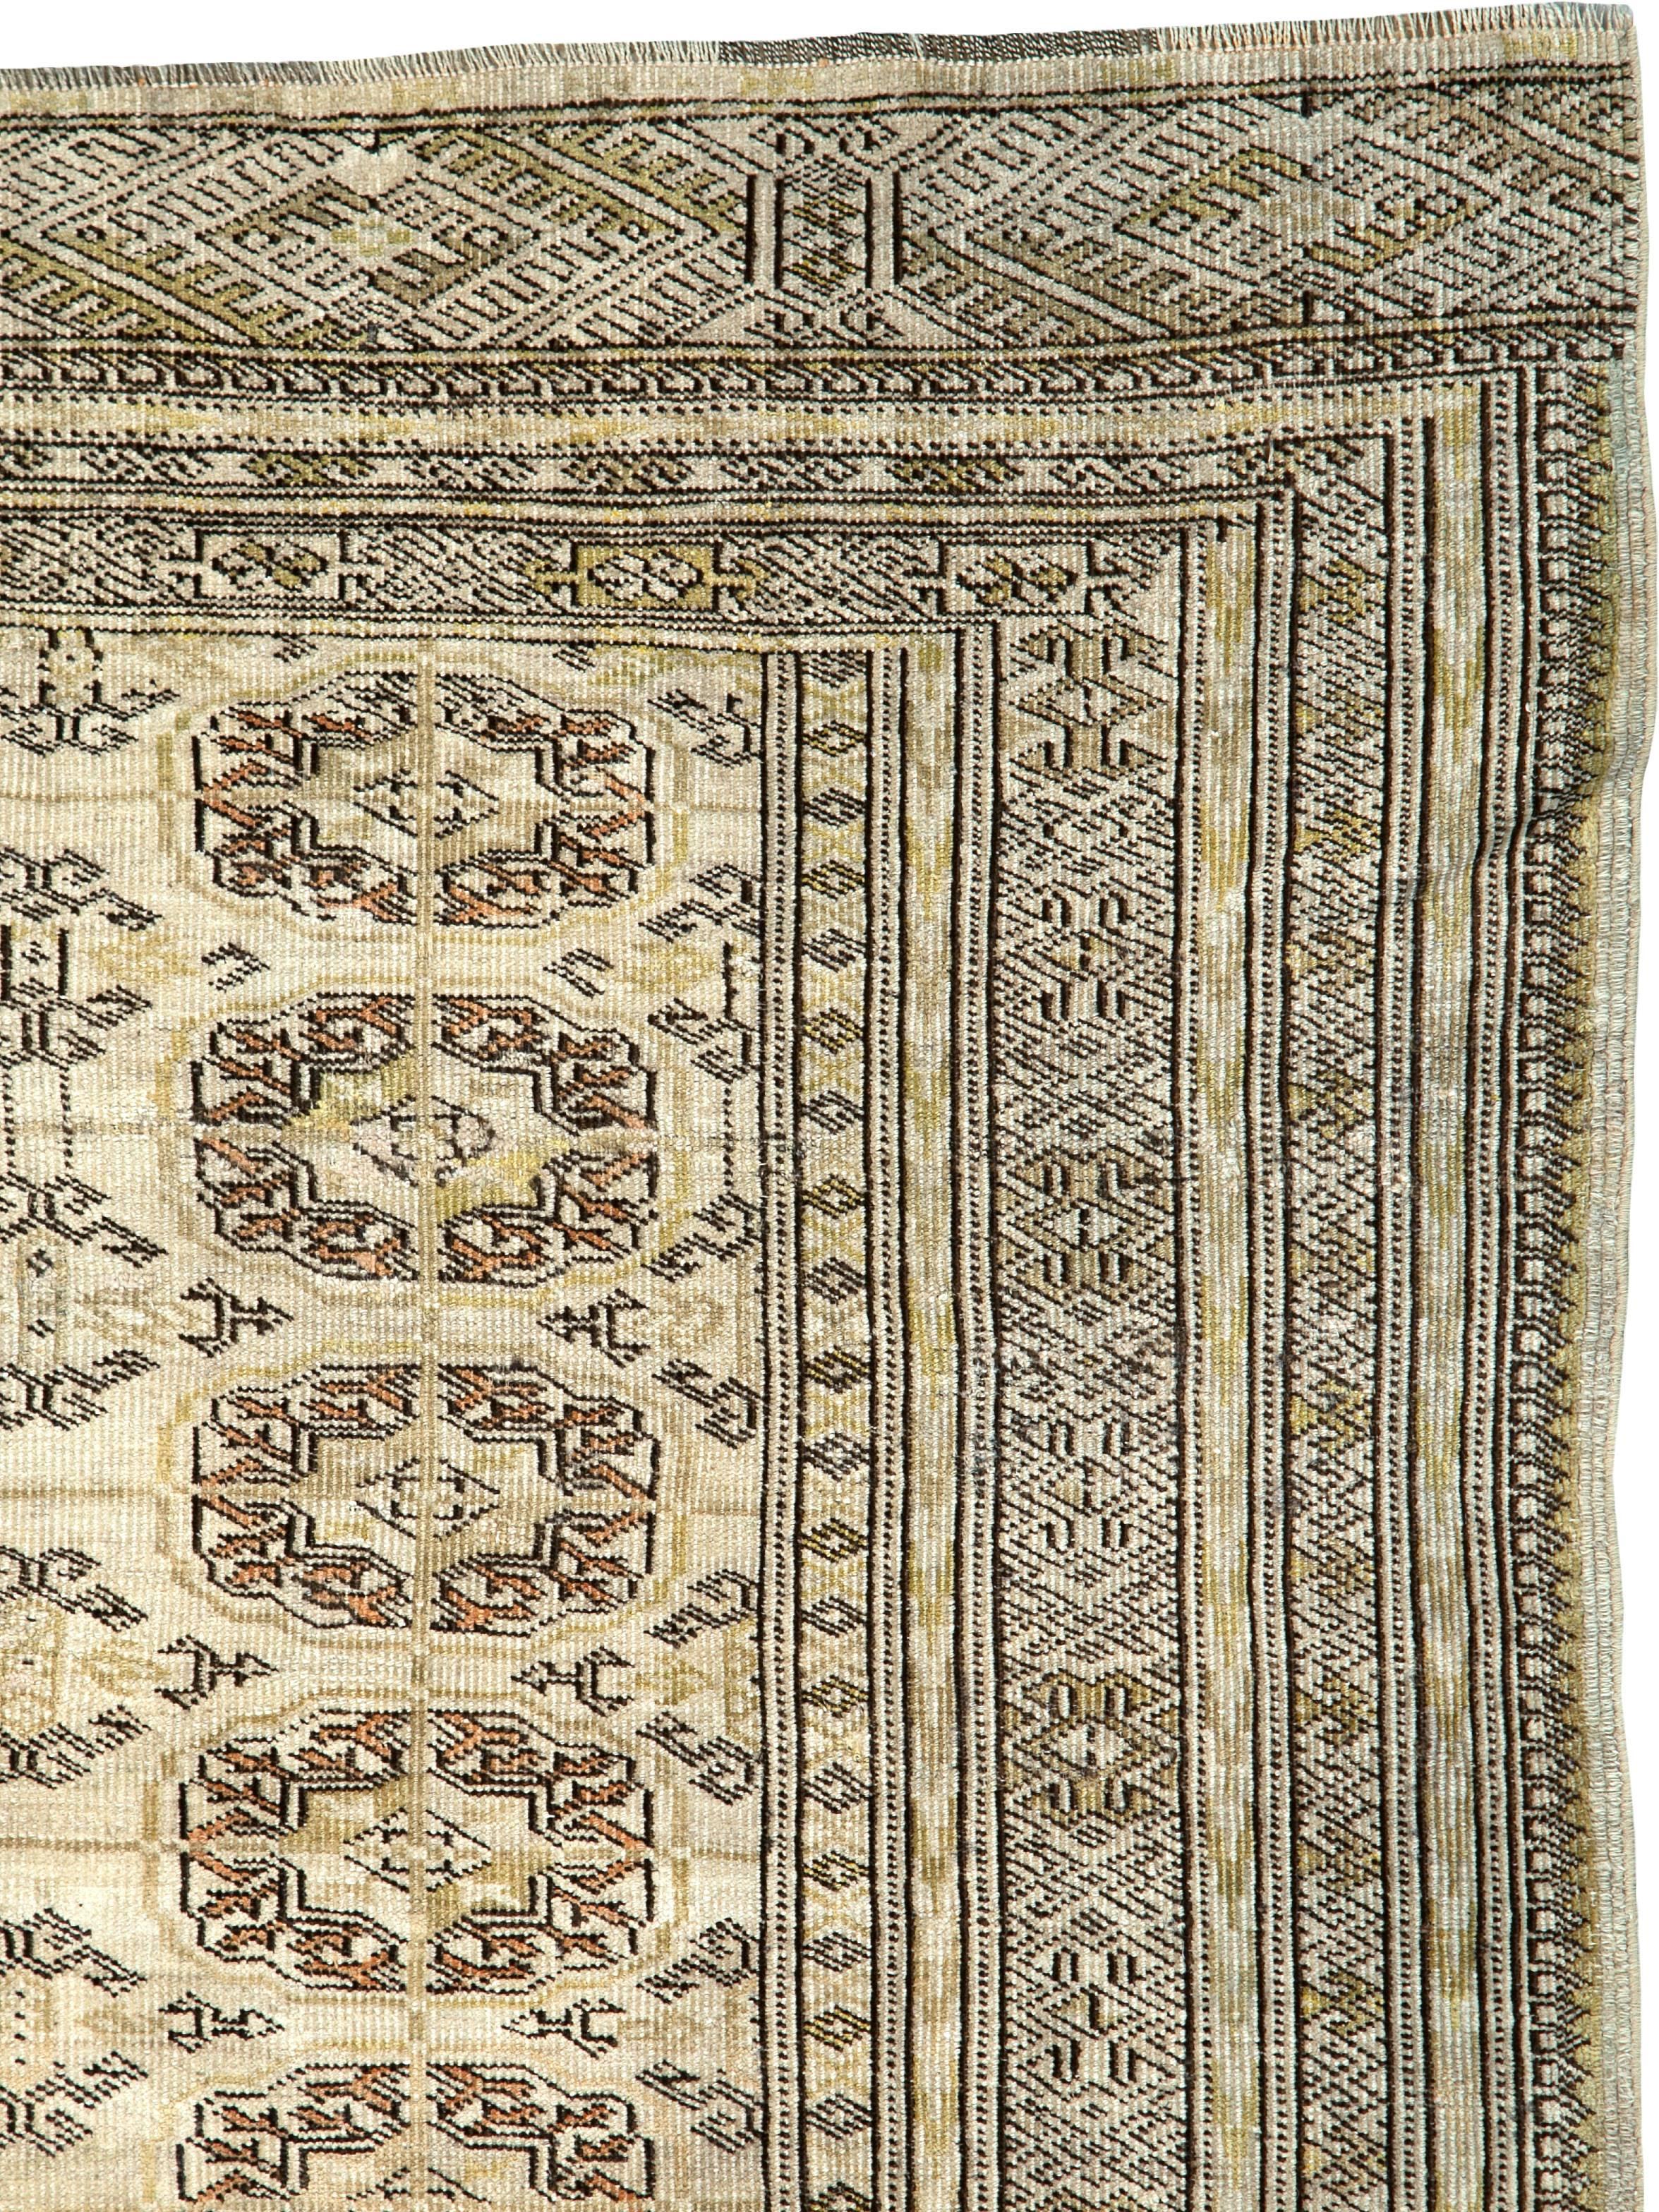 A vintage Central Asian Turkoman carpet from the mid-20th century.